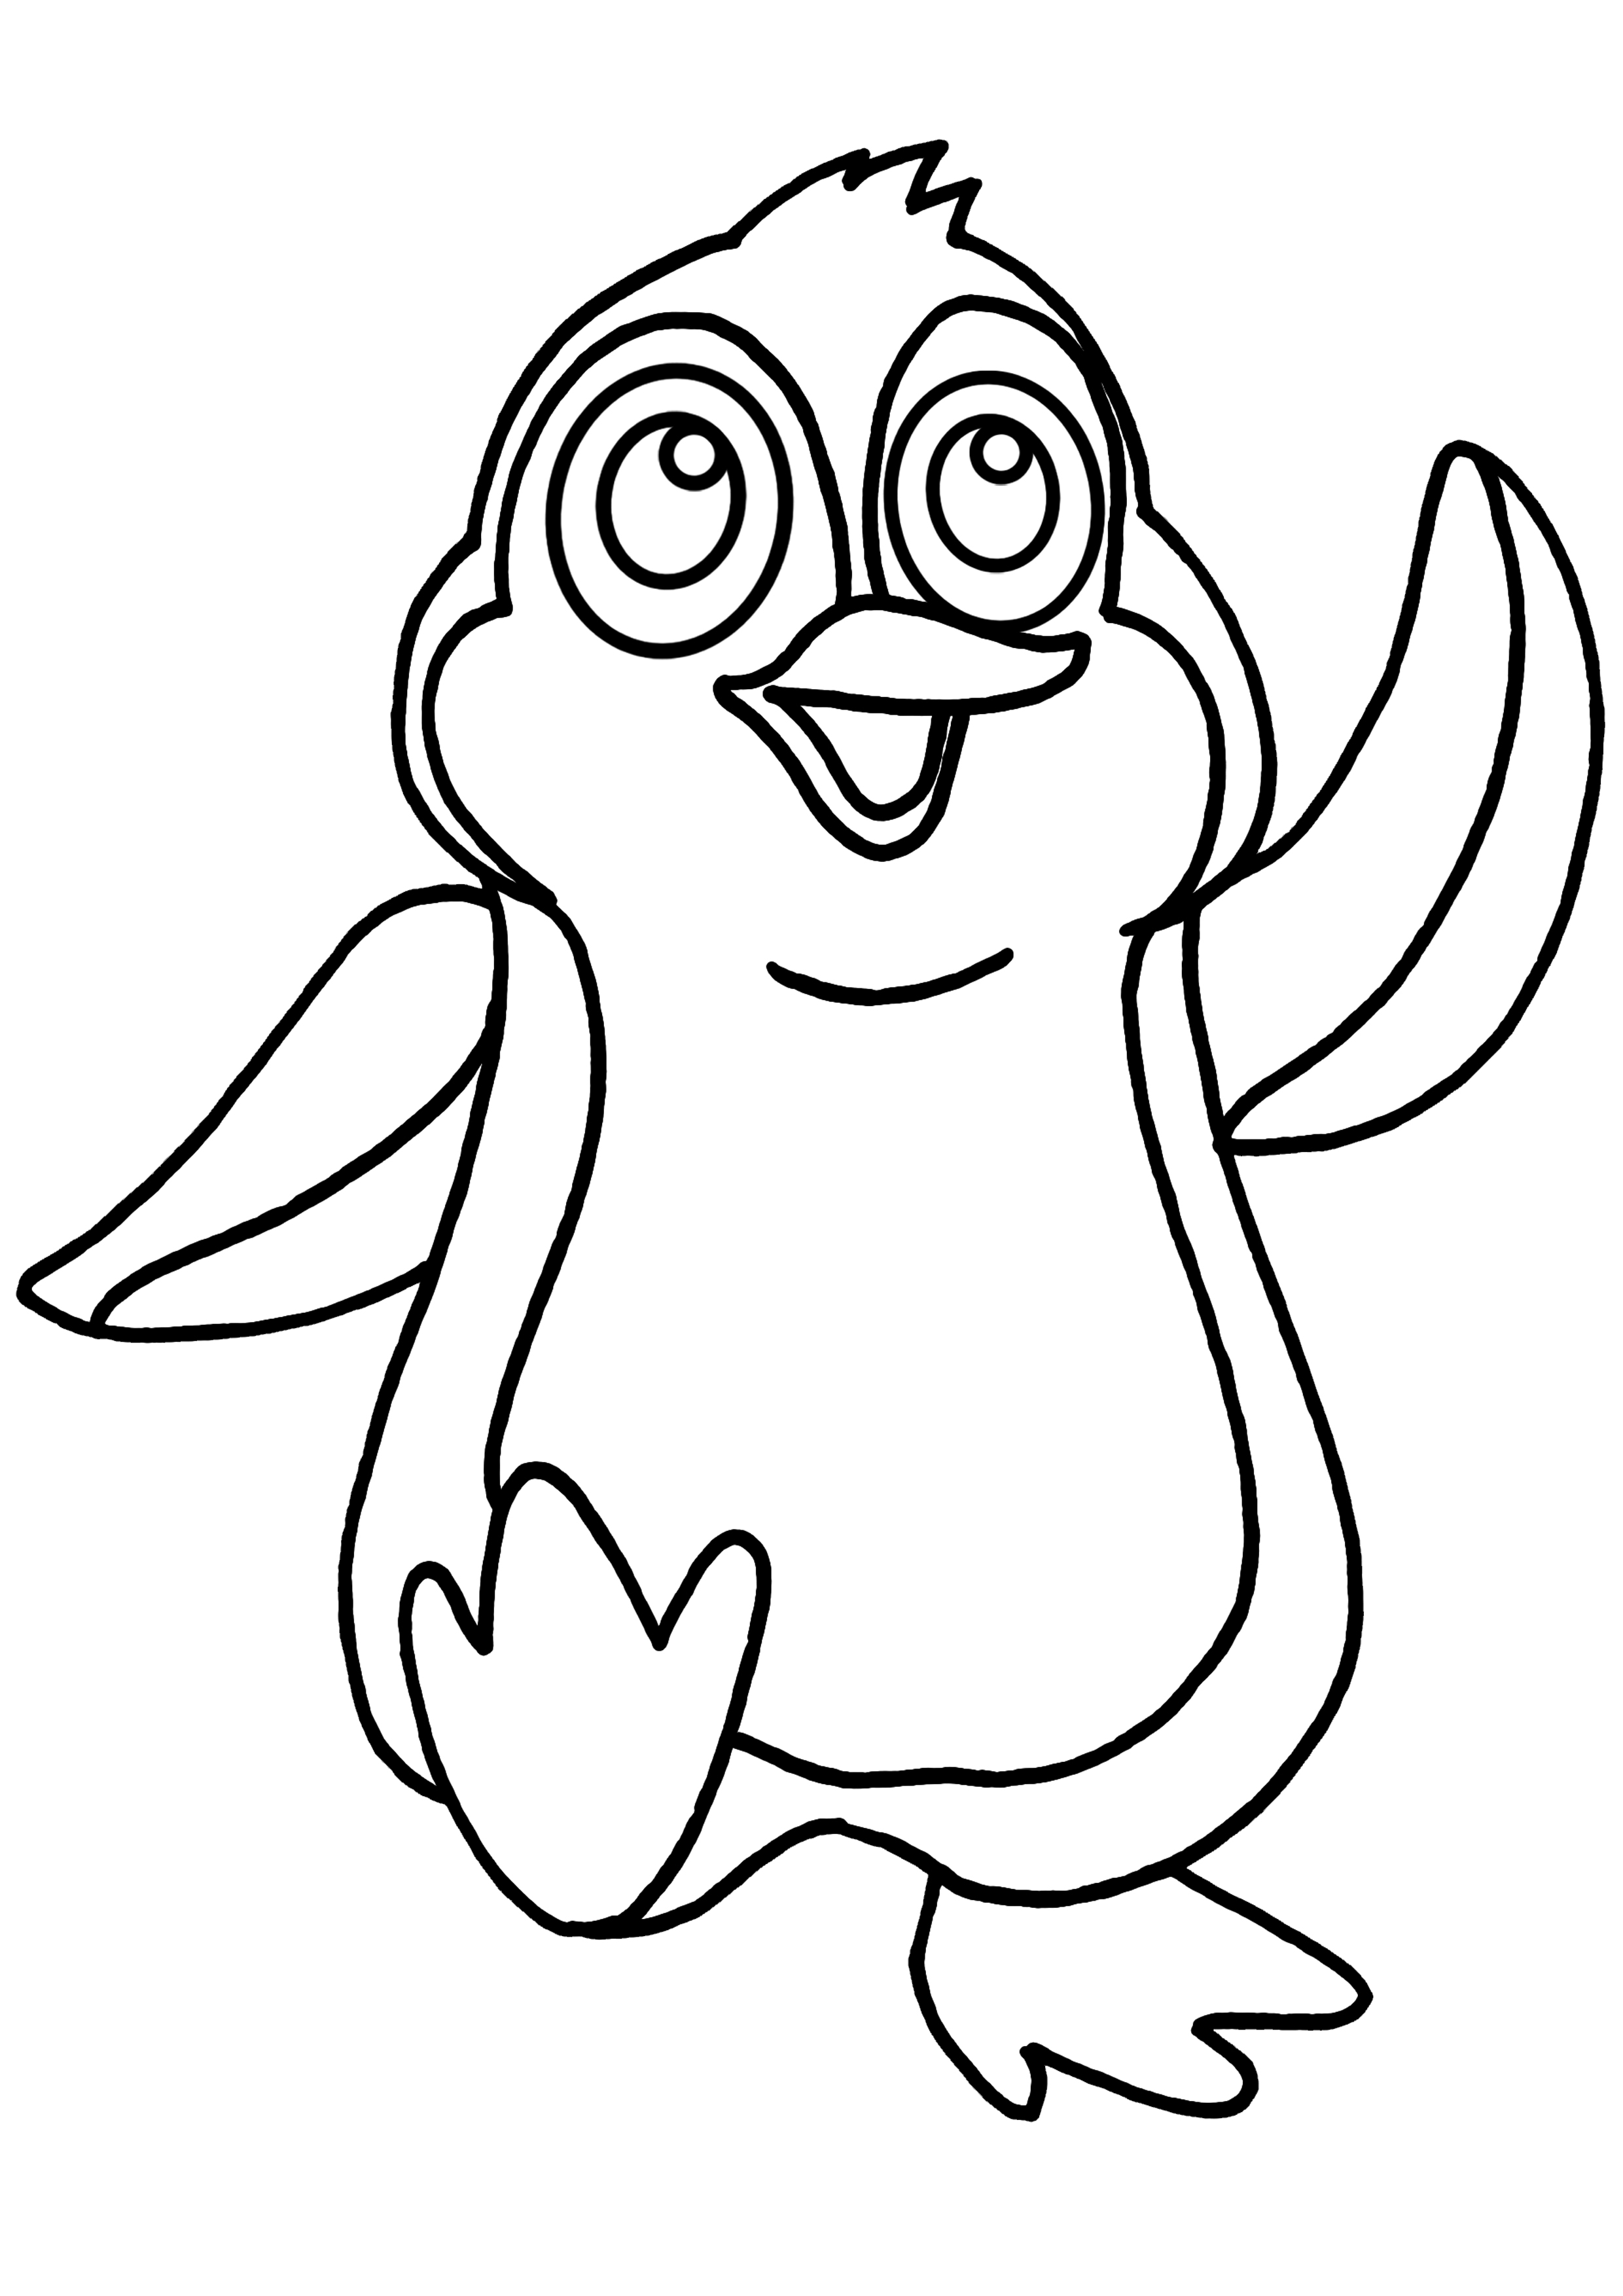 penguin-16904-animals-free-printable-coloring-pages